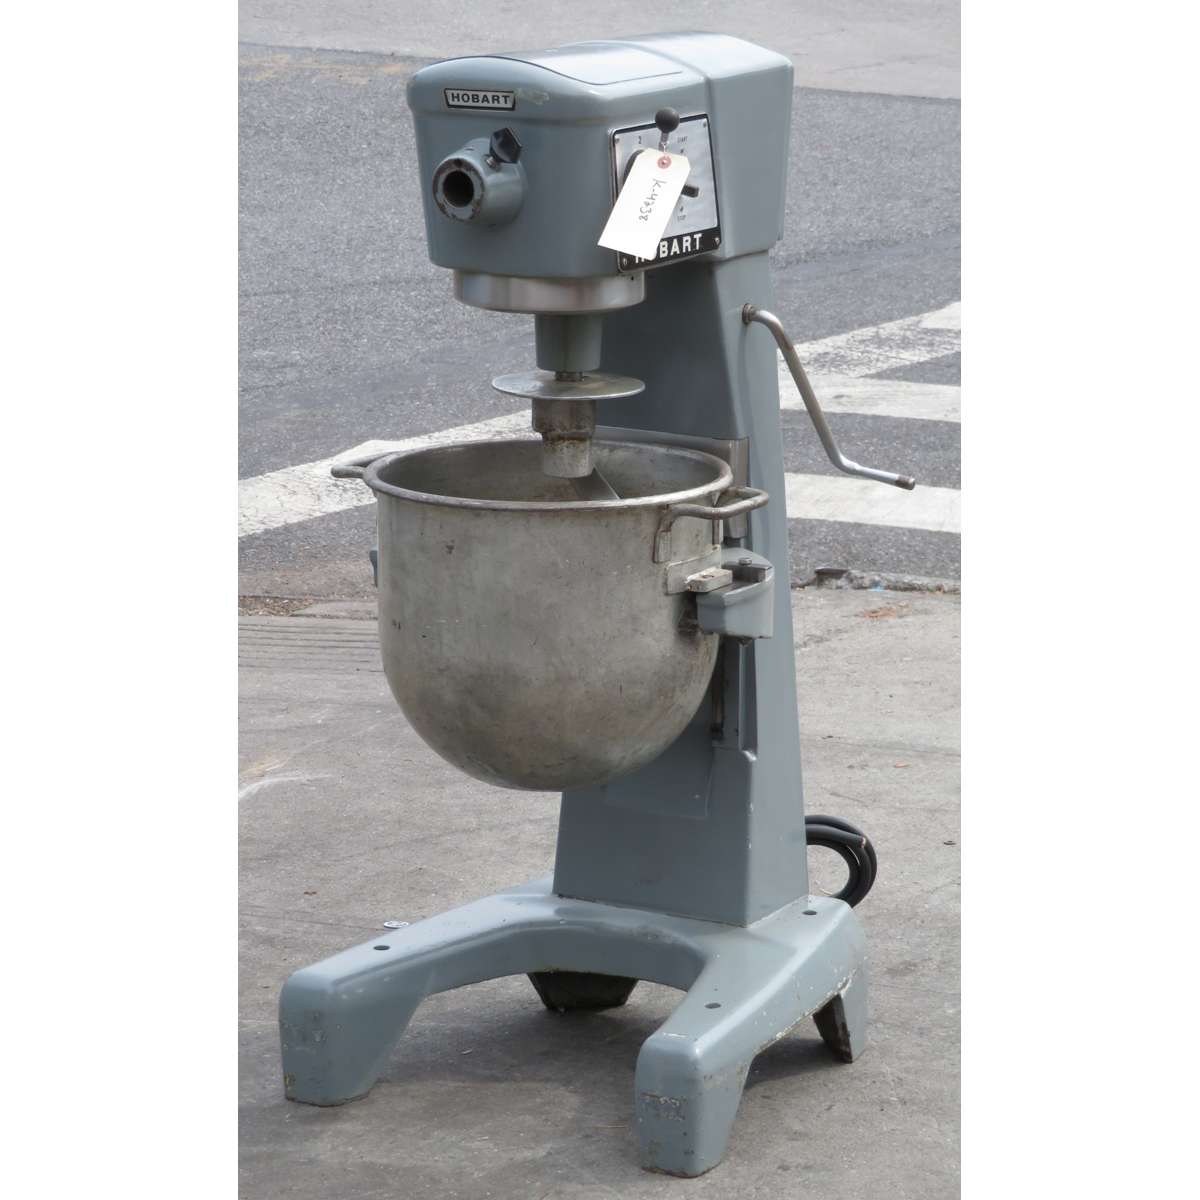 Hobart 30 Quart Mixer D300, Used Very Good Condition